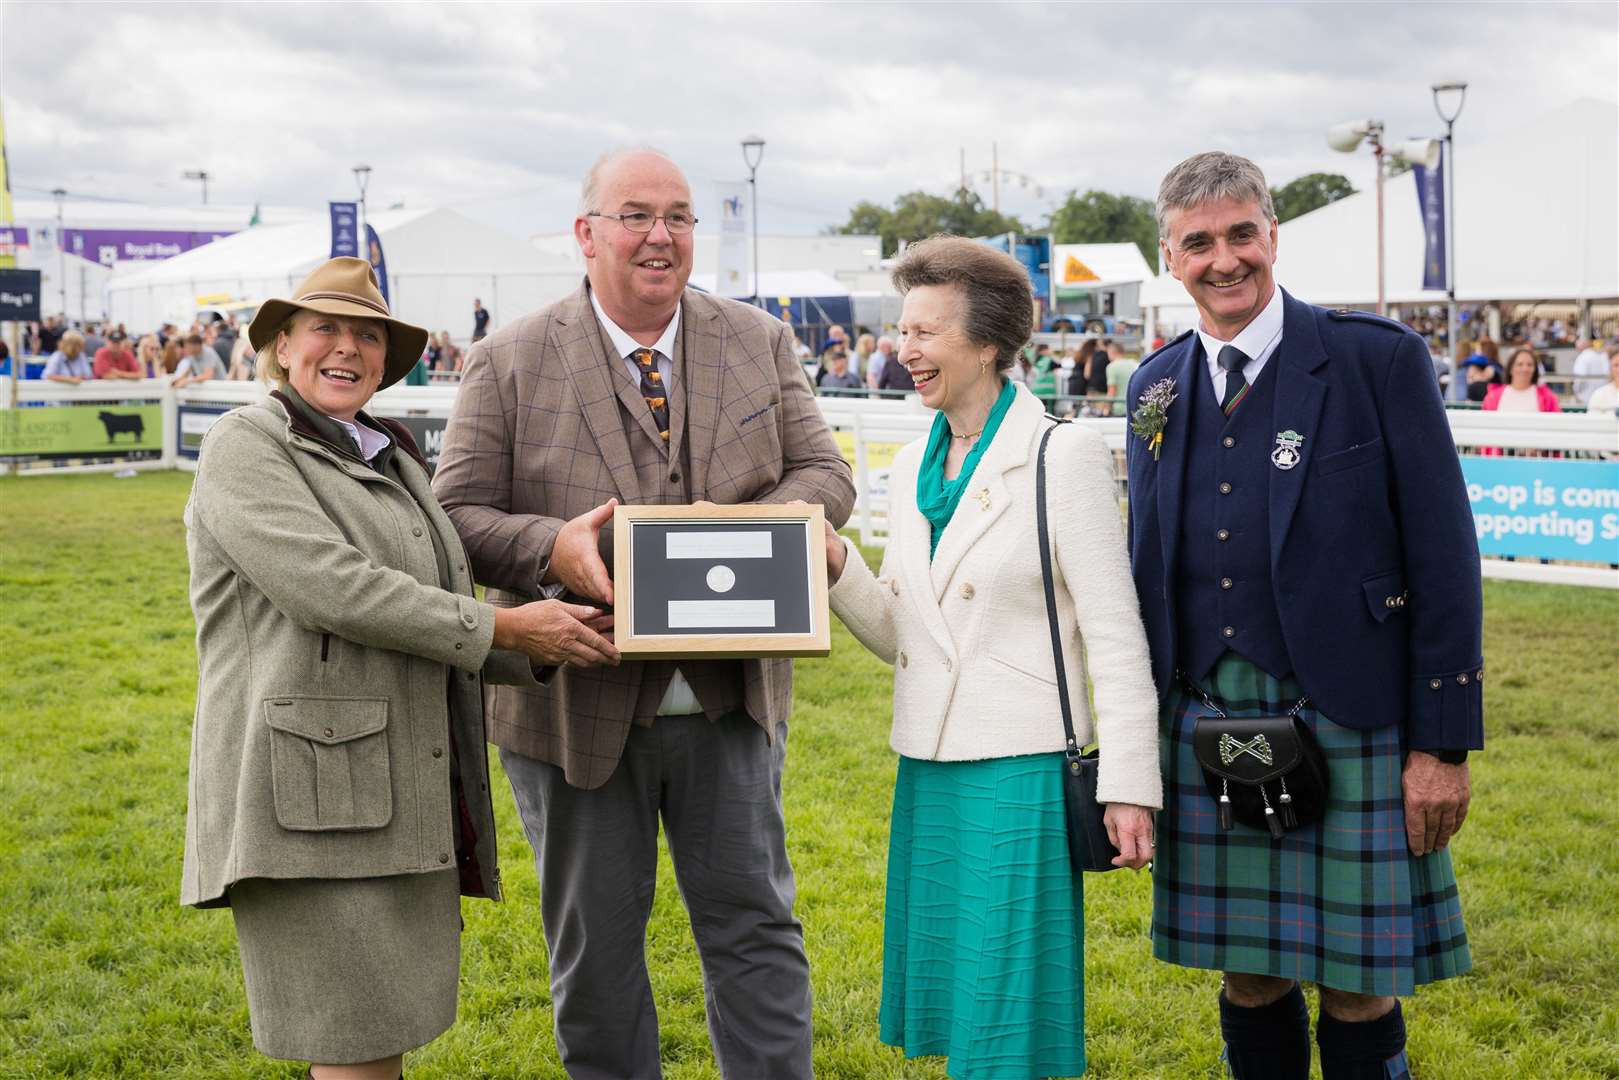 HRH Princess Anne and RHASS Chairman Jim Warnock (far right) presenting the Sir William Young Award to 2023 winners Dochy Ormiston (MVO) and Sylvia Ormiston (MVO) (left and far left).